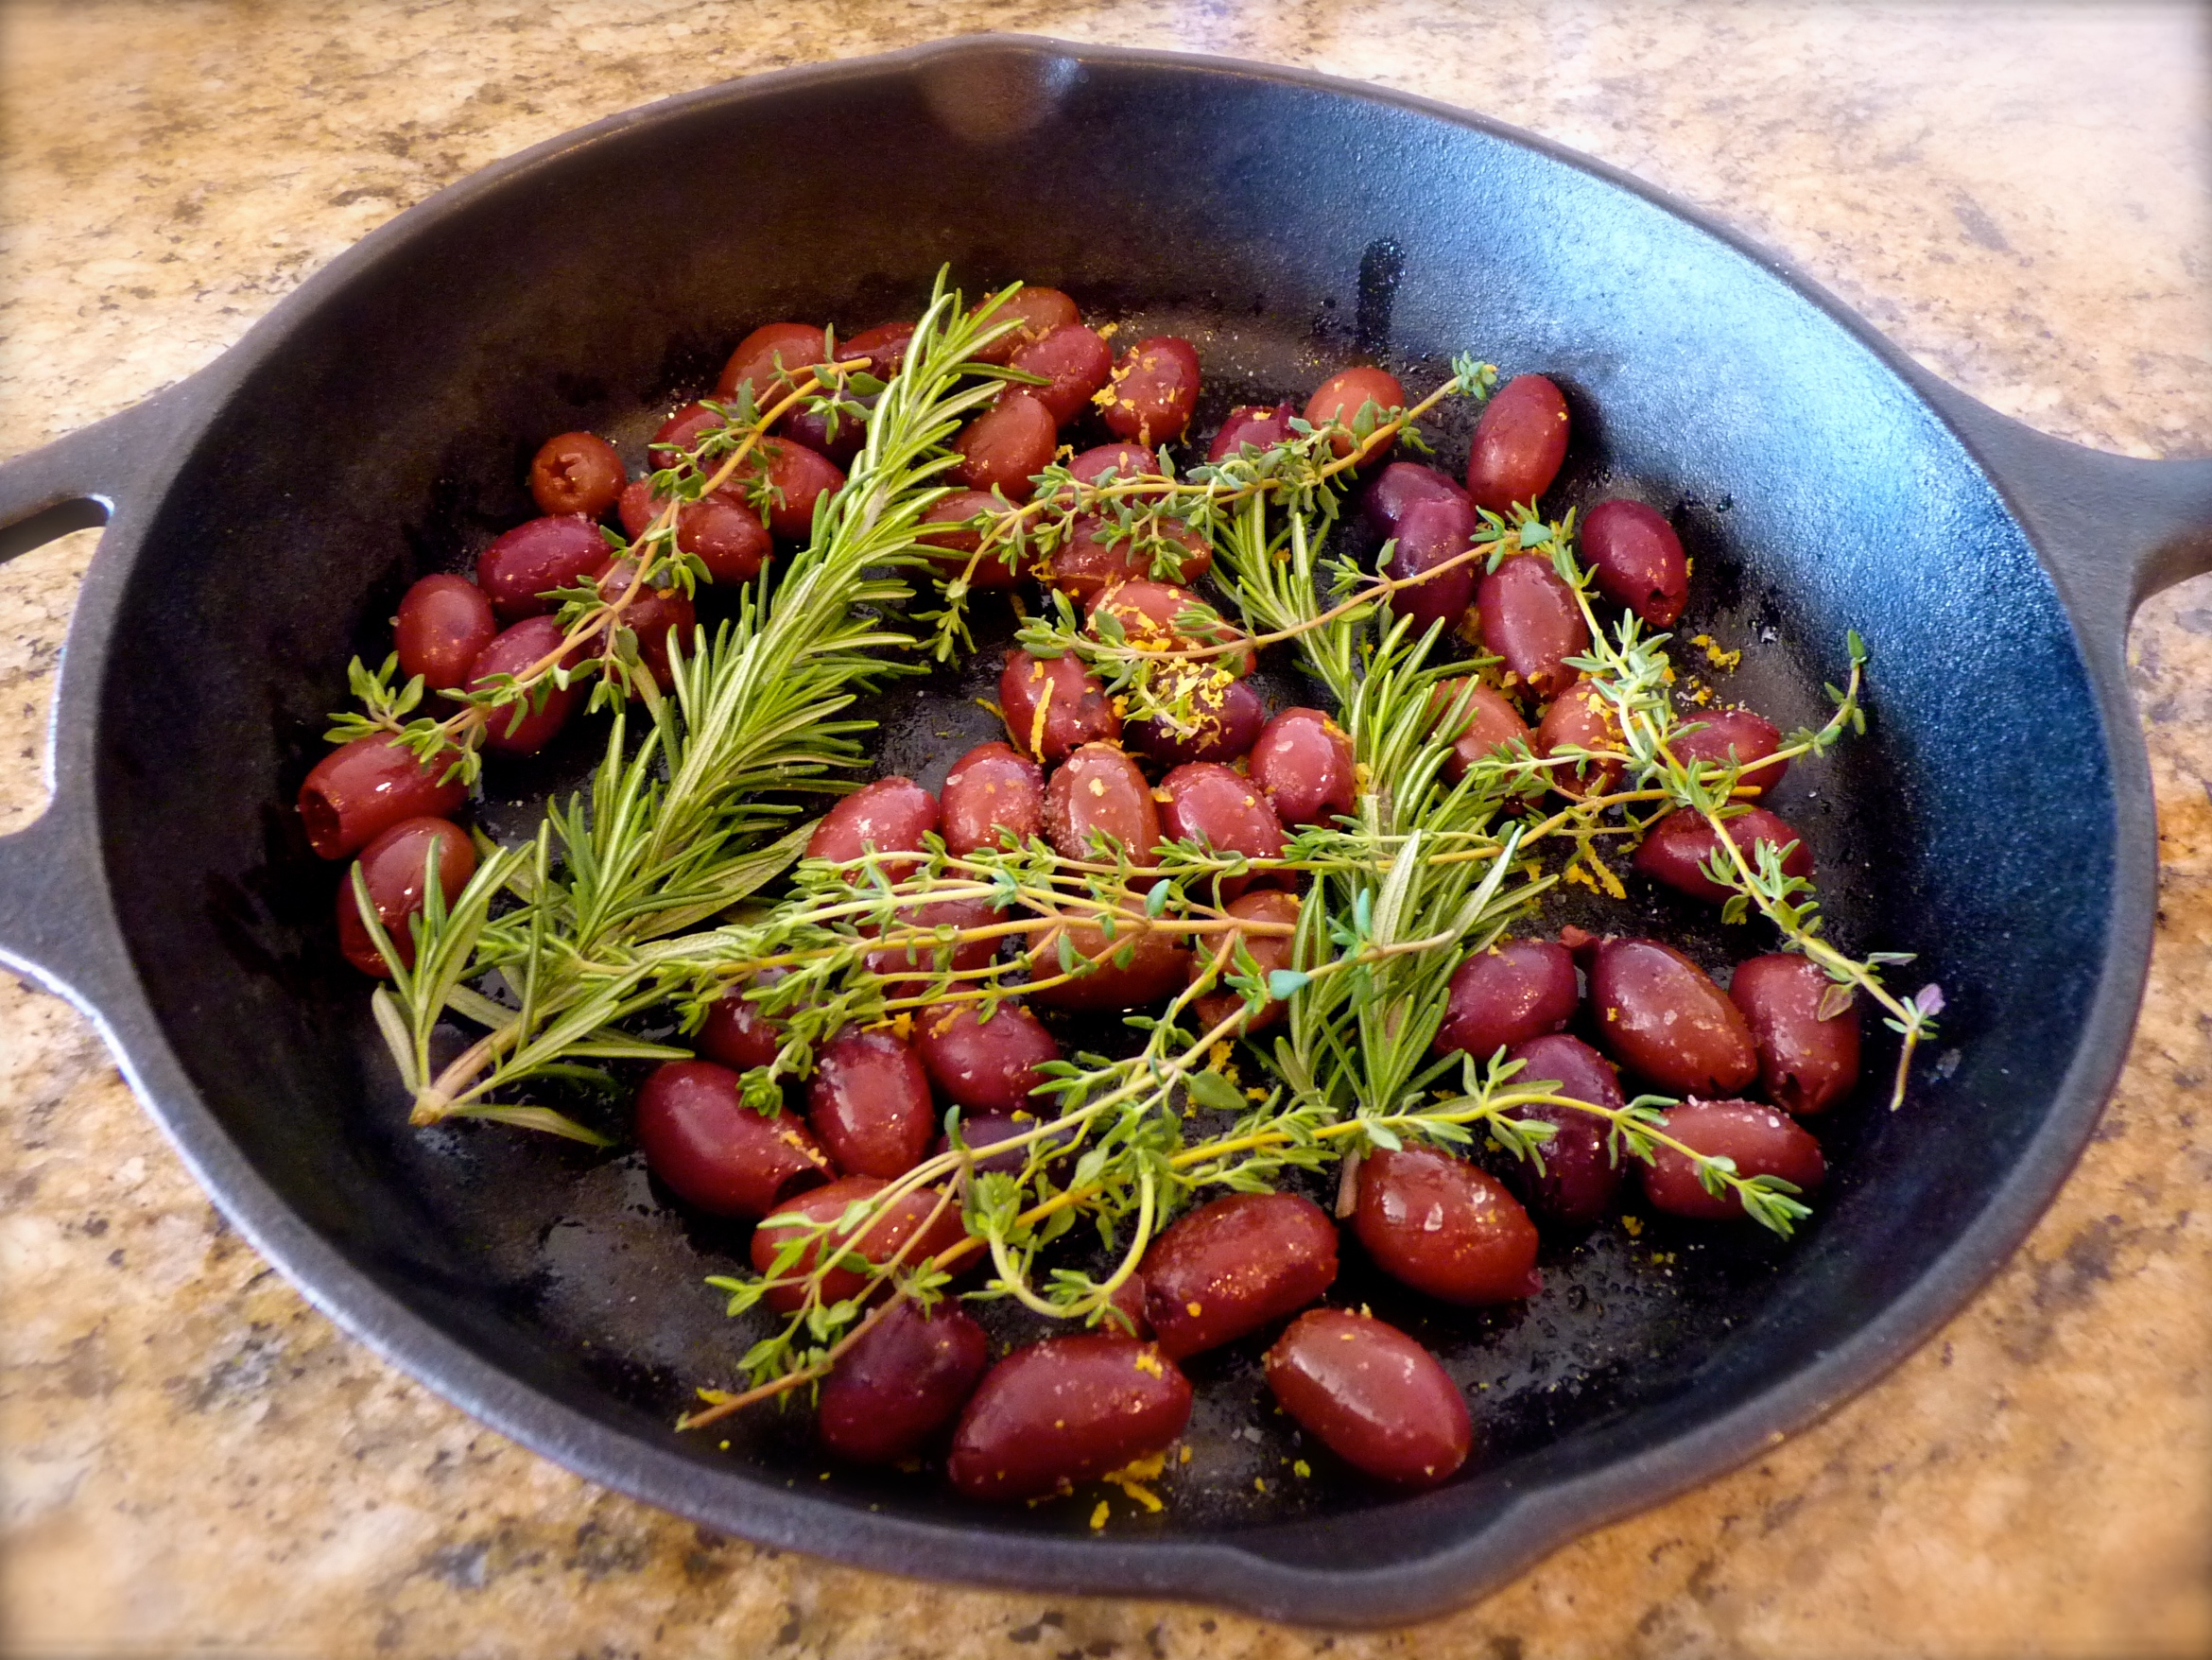 My olives (a different kind) with herbs, olive oil and seasoning, ready for the 425 degree over